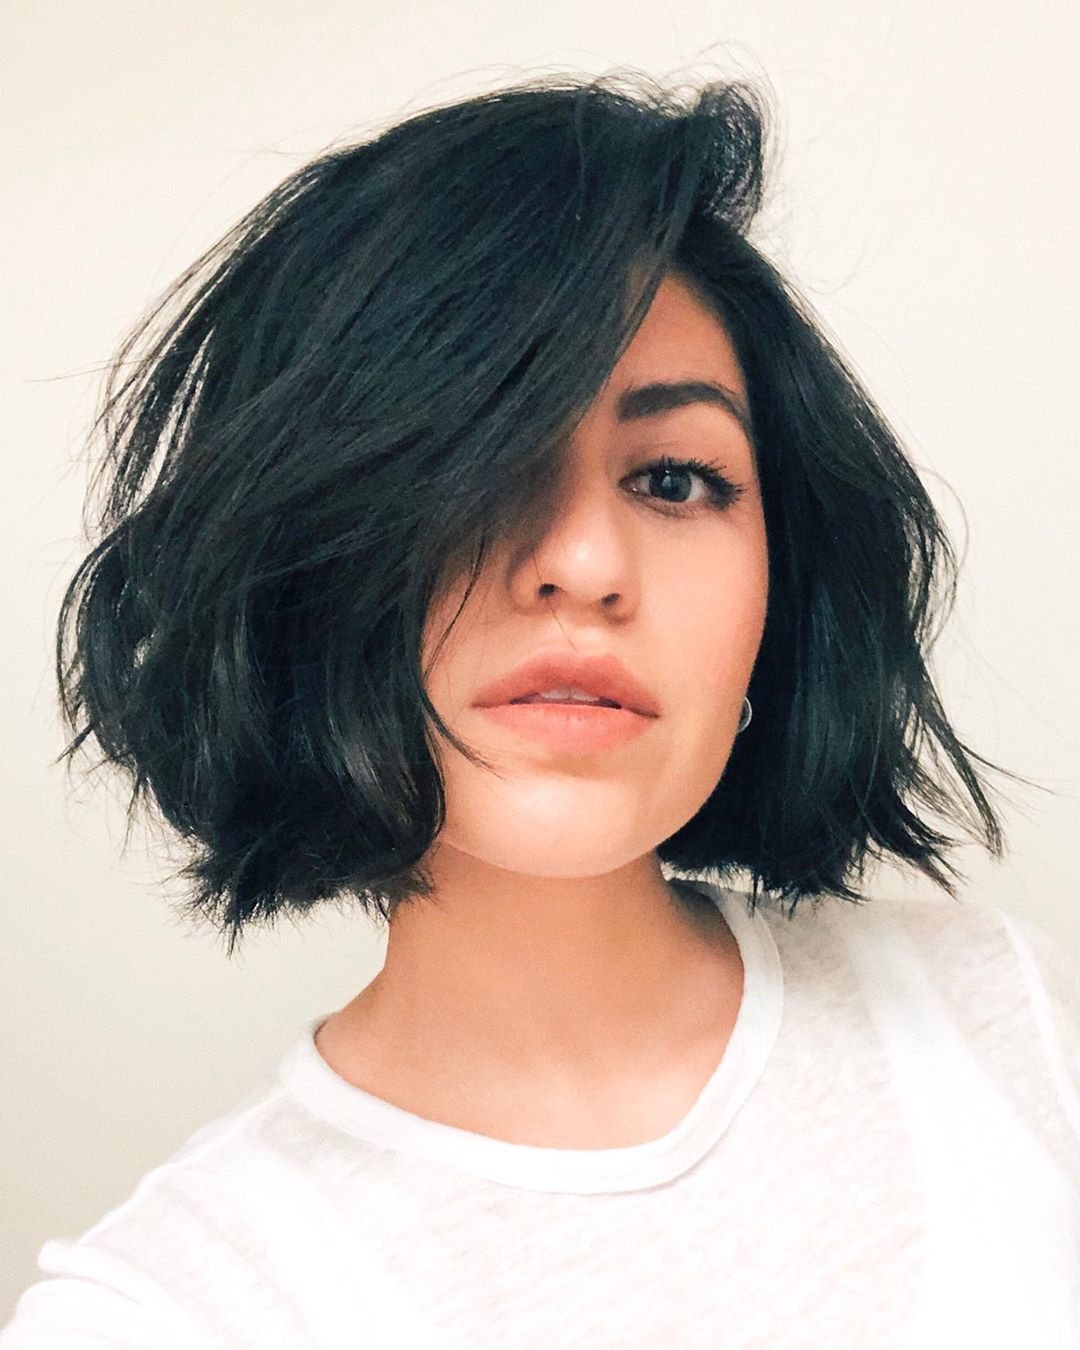 Easy Bob Haircut Carefree & Casual Trends - Women Short Hairstyle Ideas